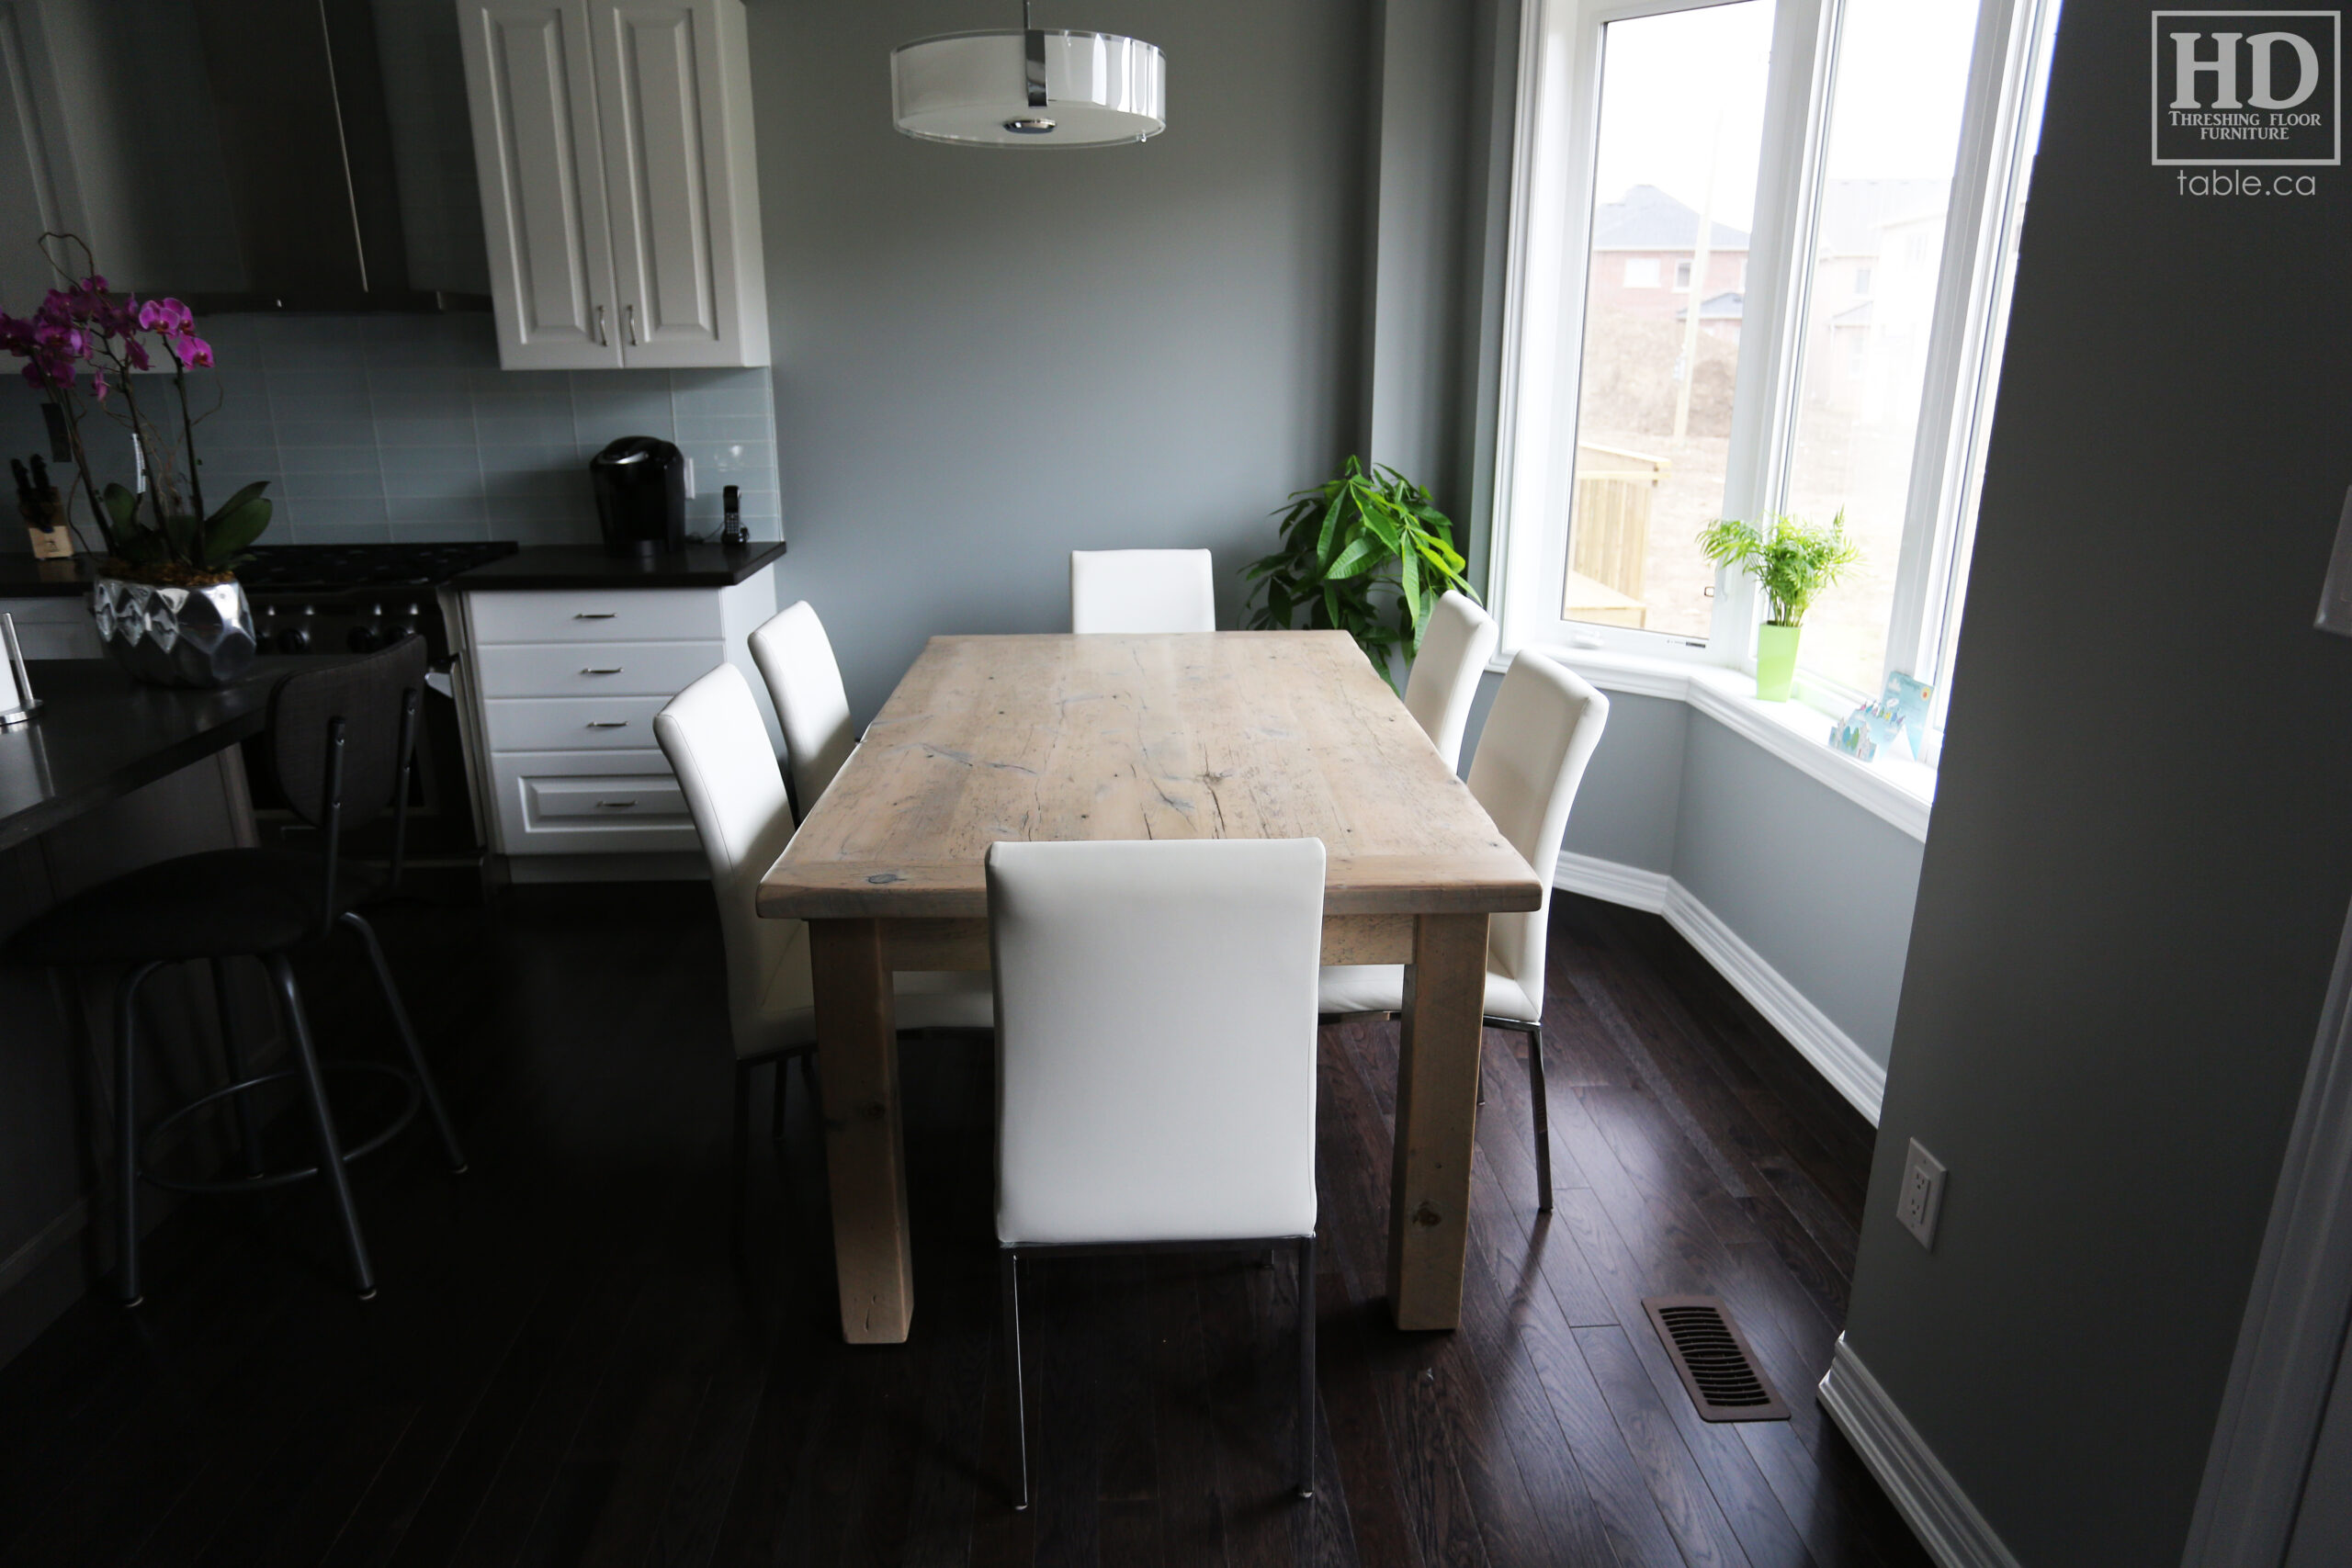 Reclaimed Wood Table with Whitewash Option / www.table.ca